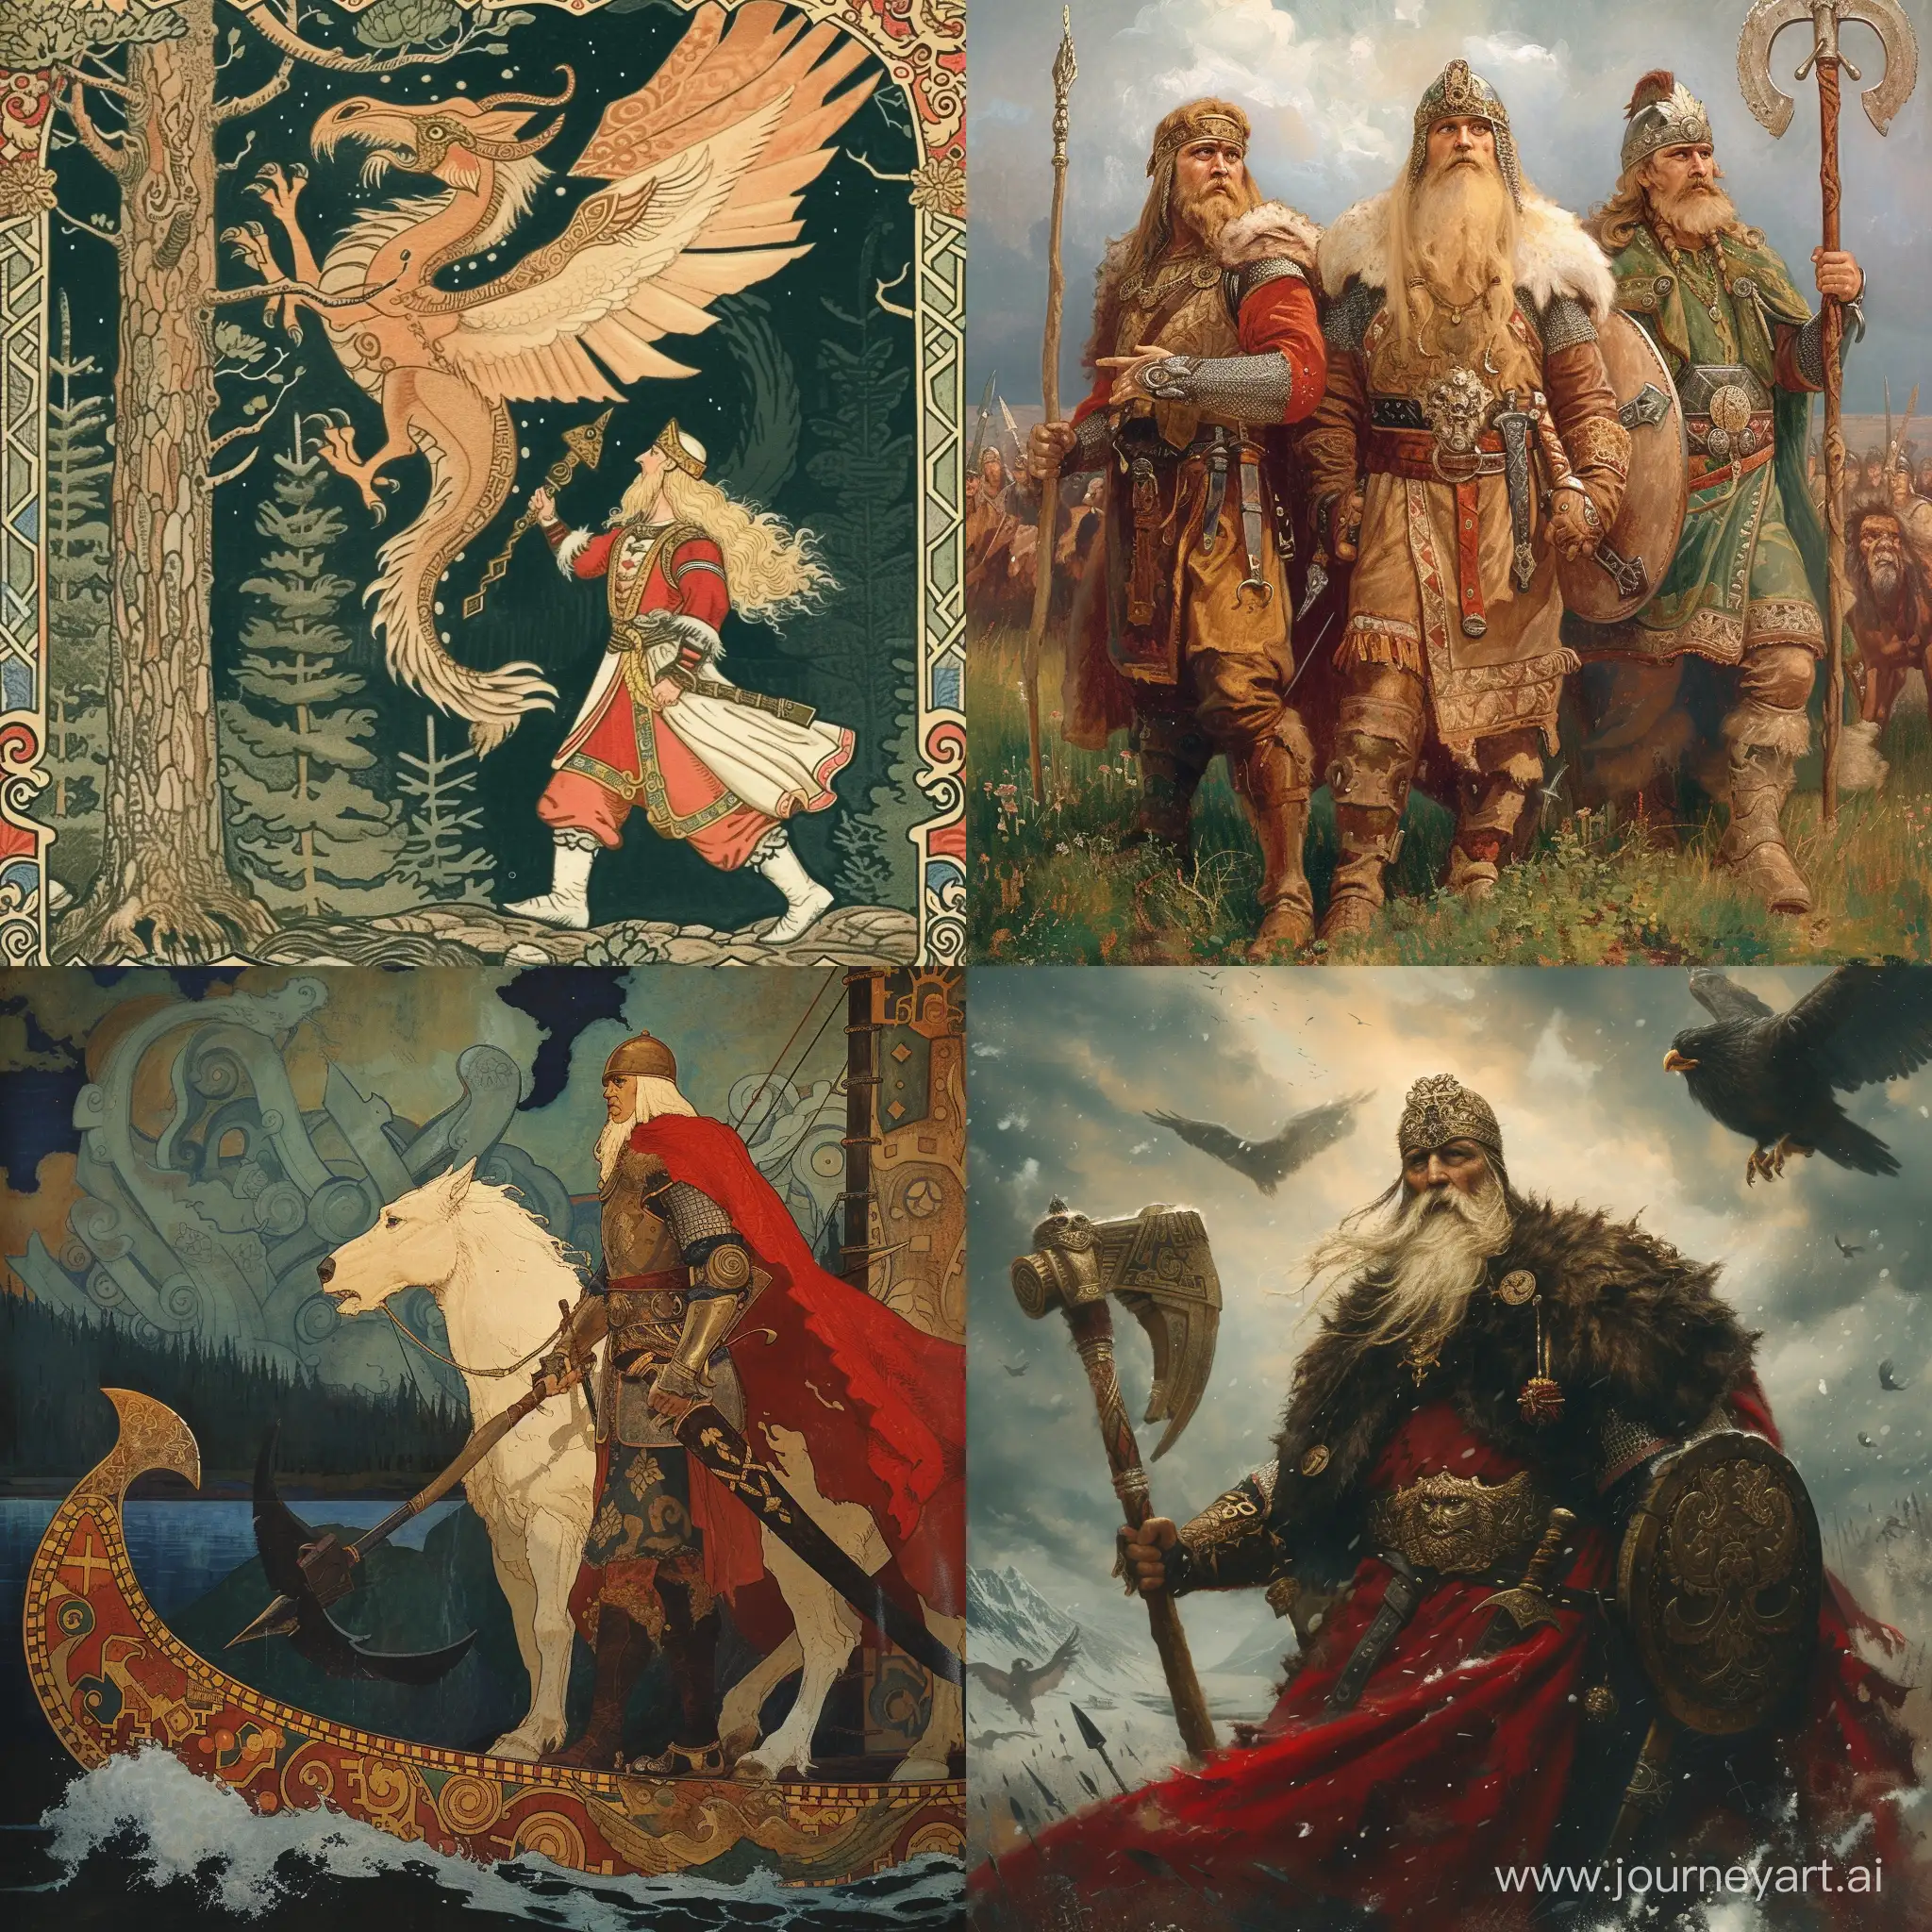 the connection between Russian culture and Scandinavian myths